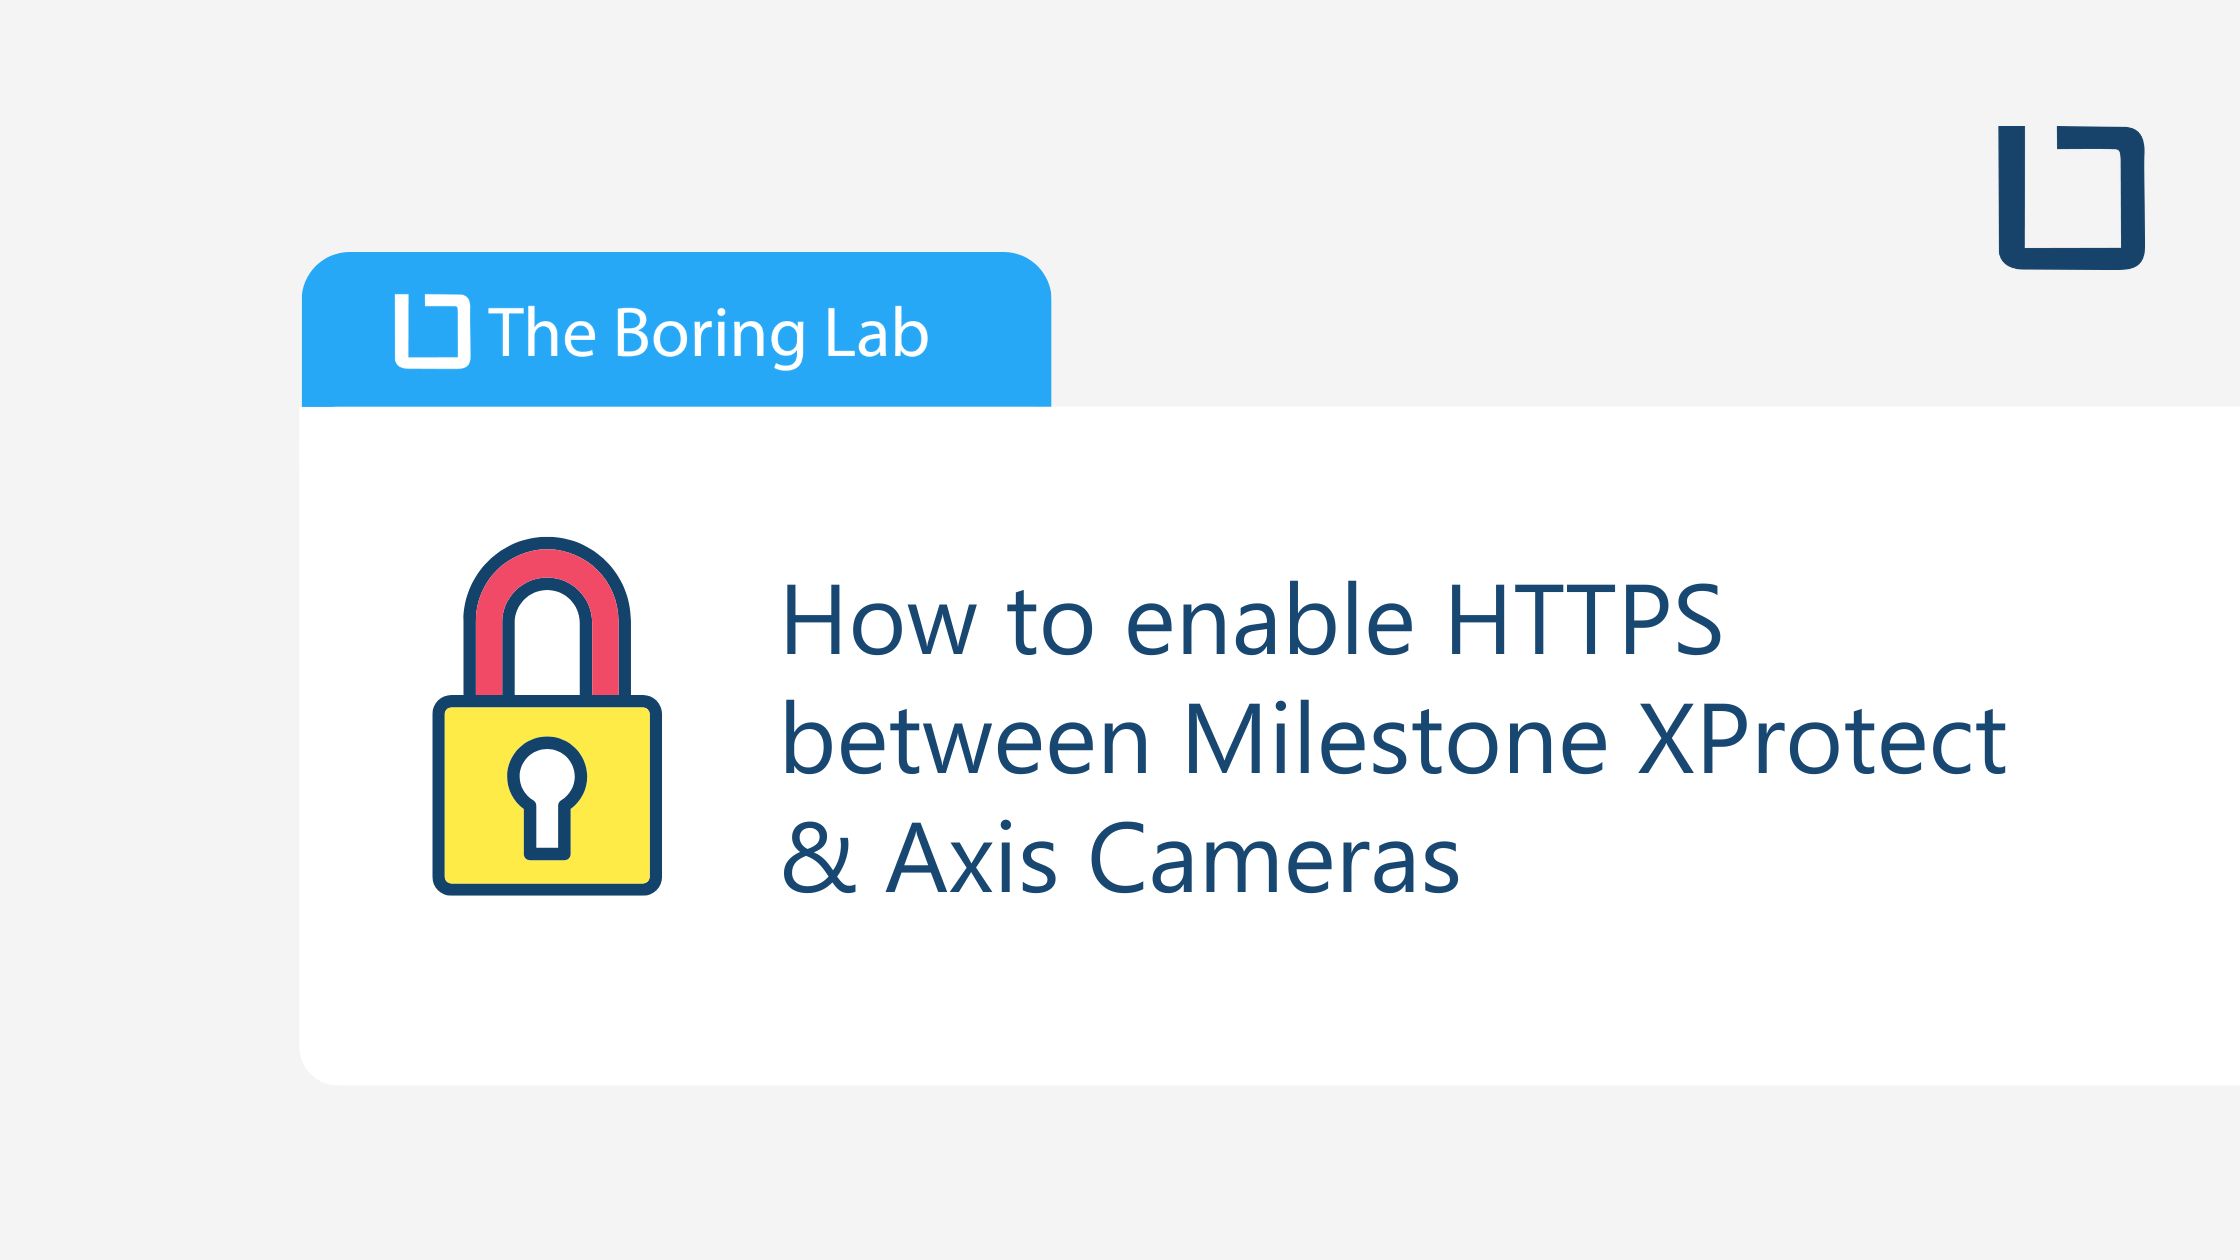 How to enable HTTPS between Milestone XProtect & Axis Cameras